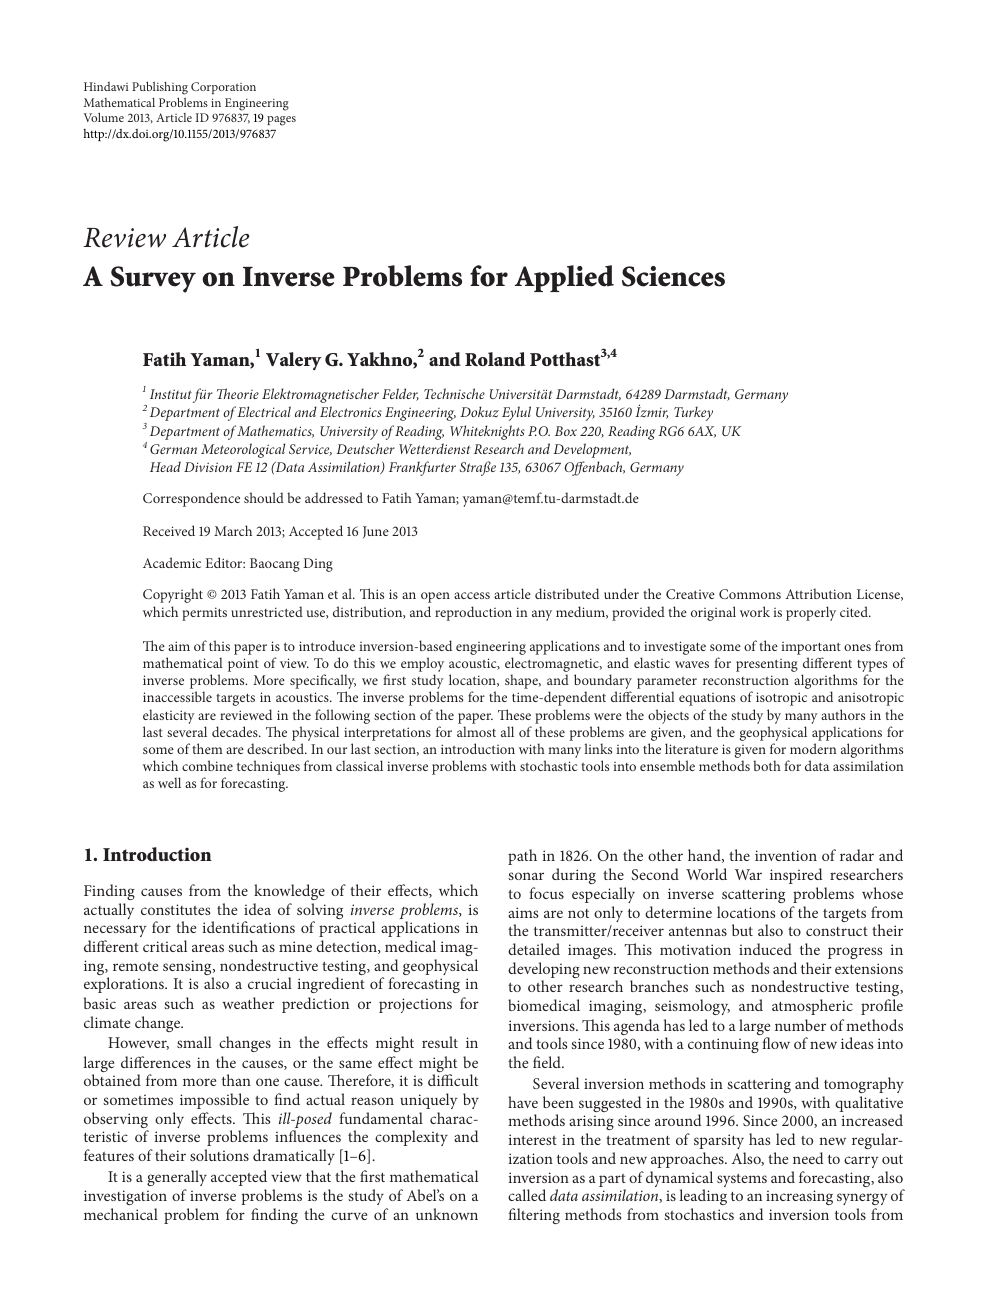 A Survey On Inverse Problems For Applied Sciences Topic Of Research Paper In Mathematics Download Scholarly Article Pdf And Read For Free On Cyberleninka Open Science Hub